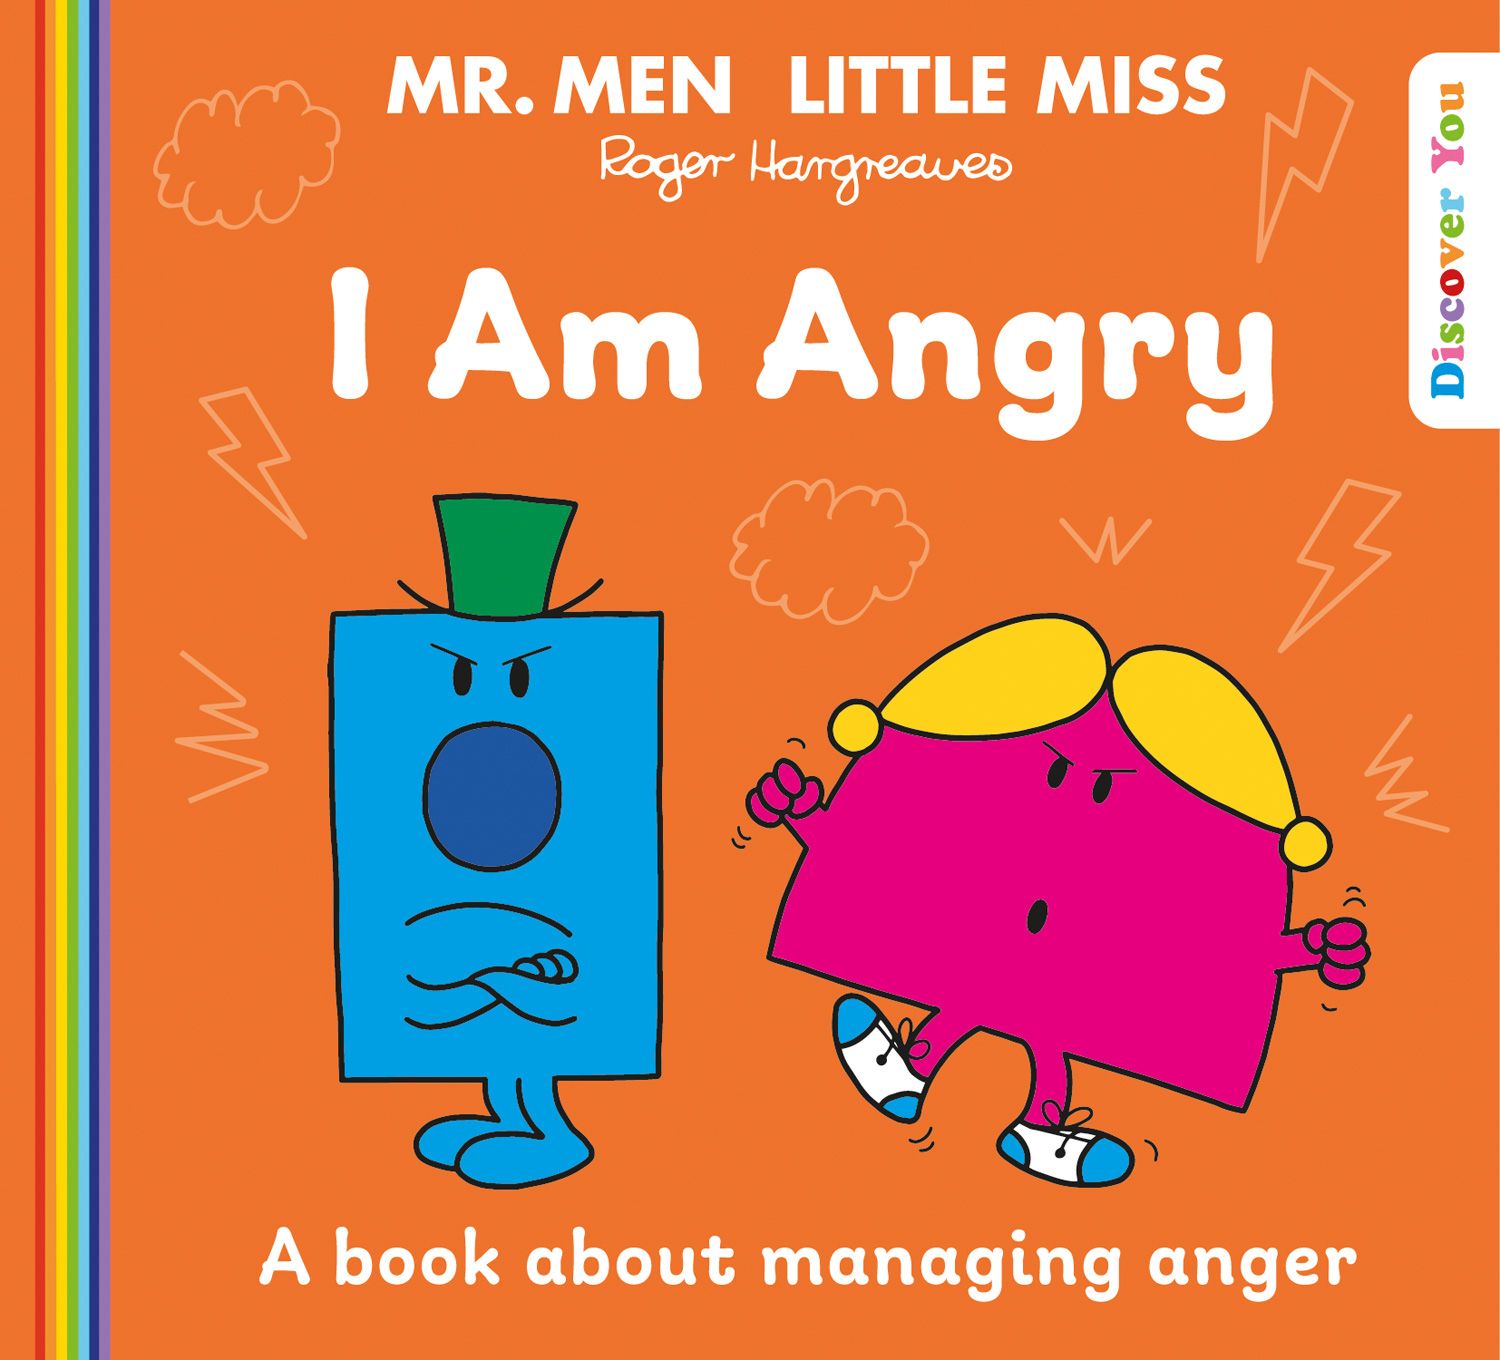 Mr Men And Little Miss Discover You Mr Men Little Miss I Am Angry